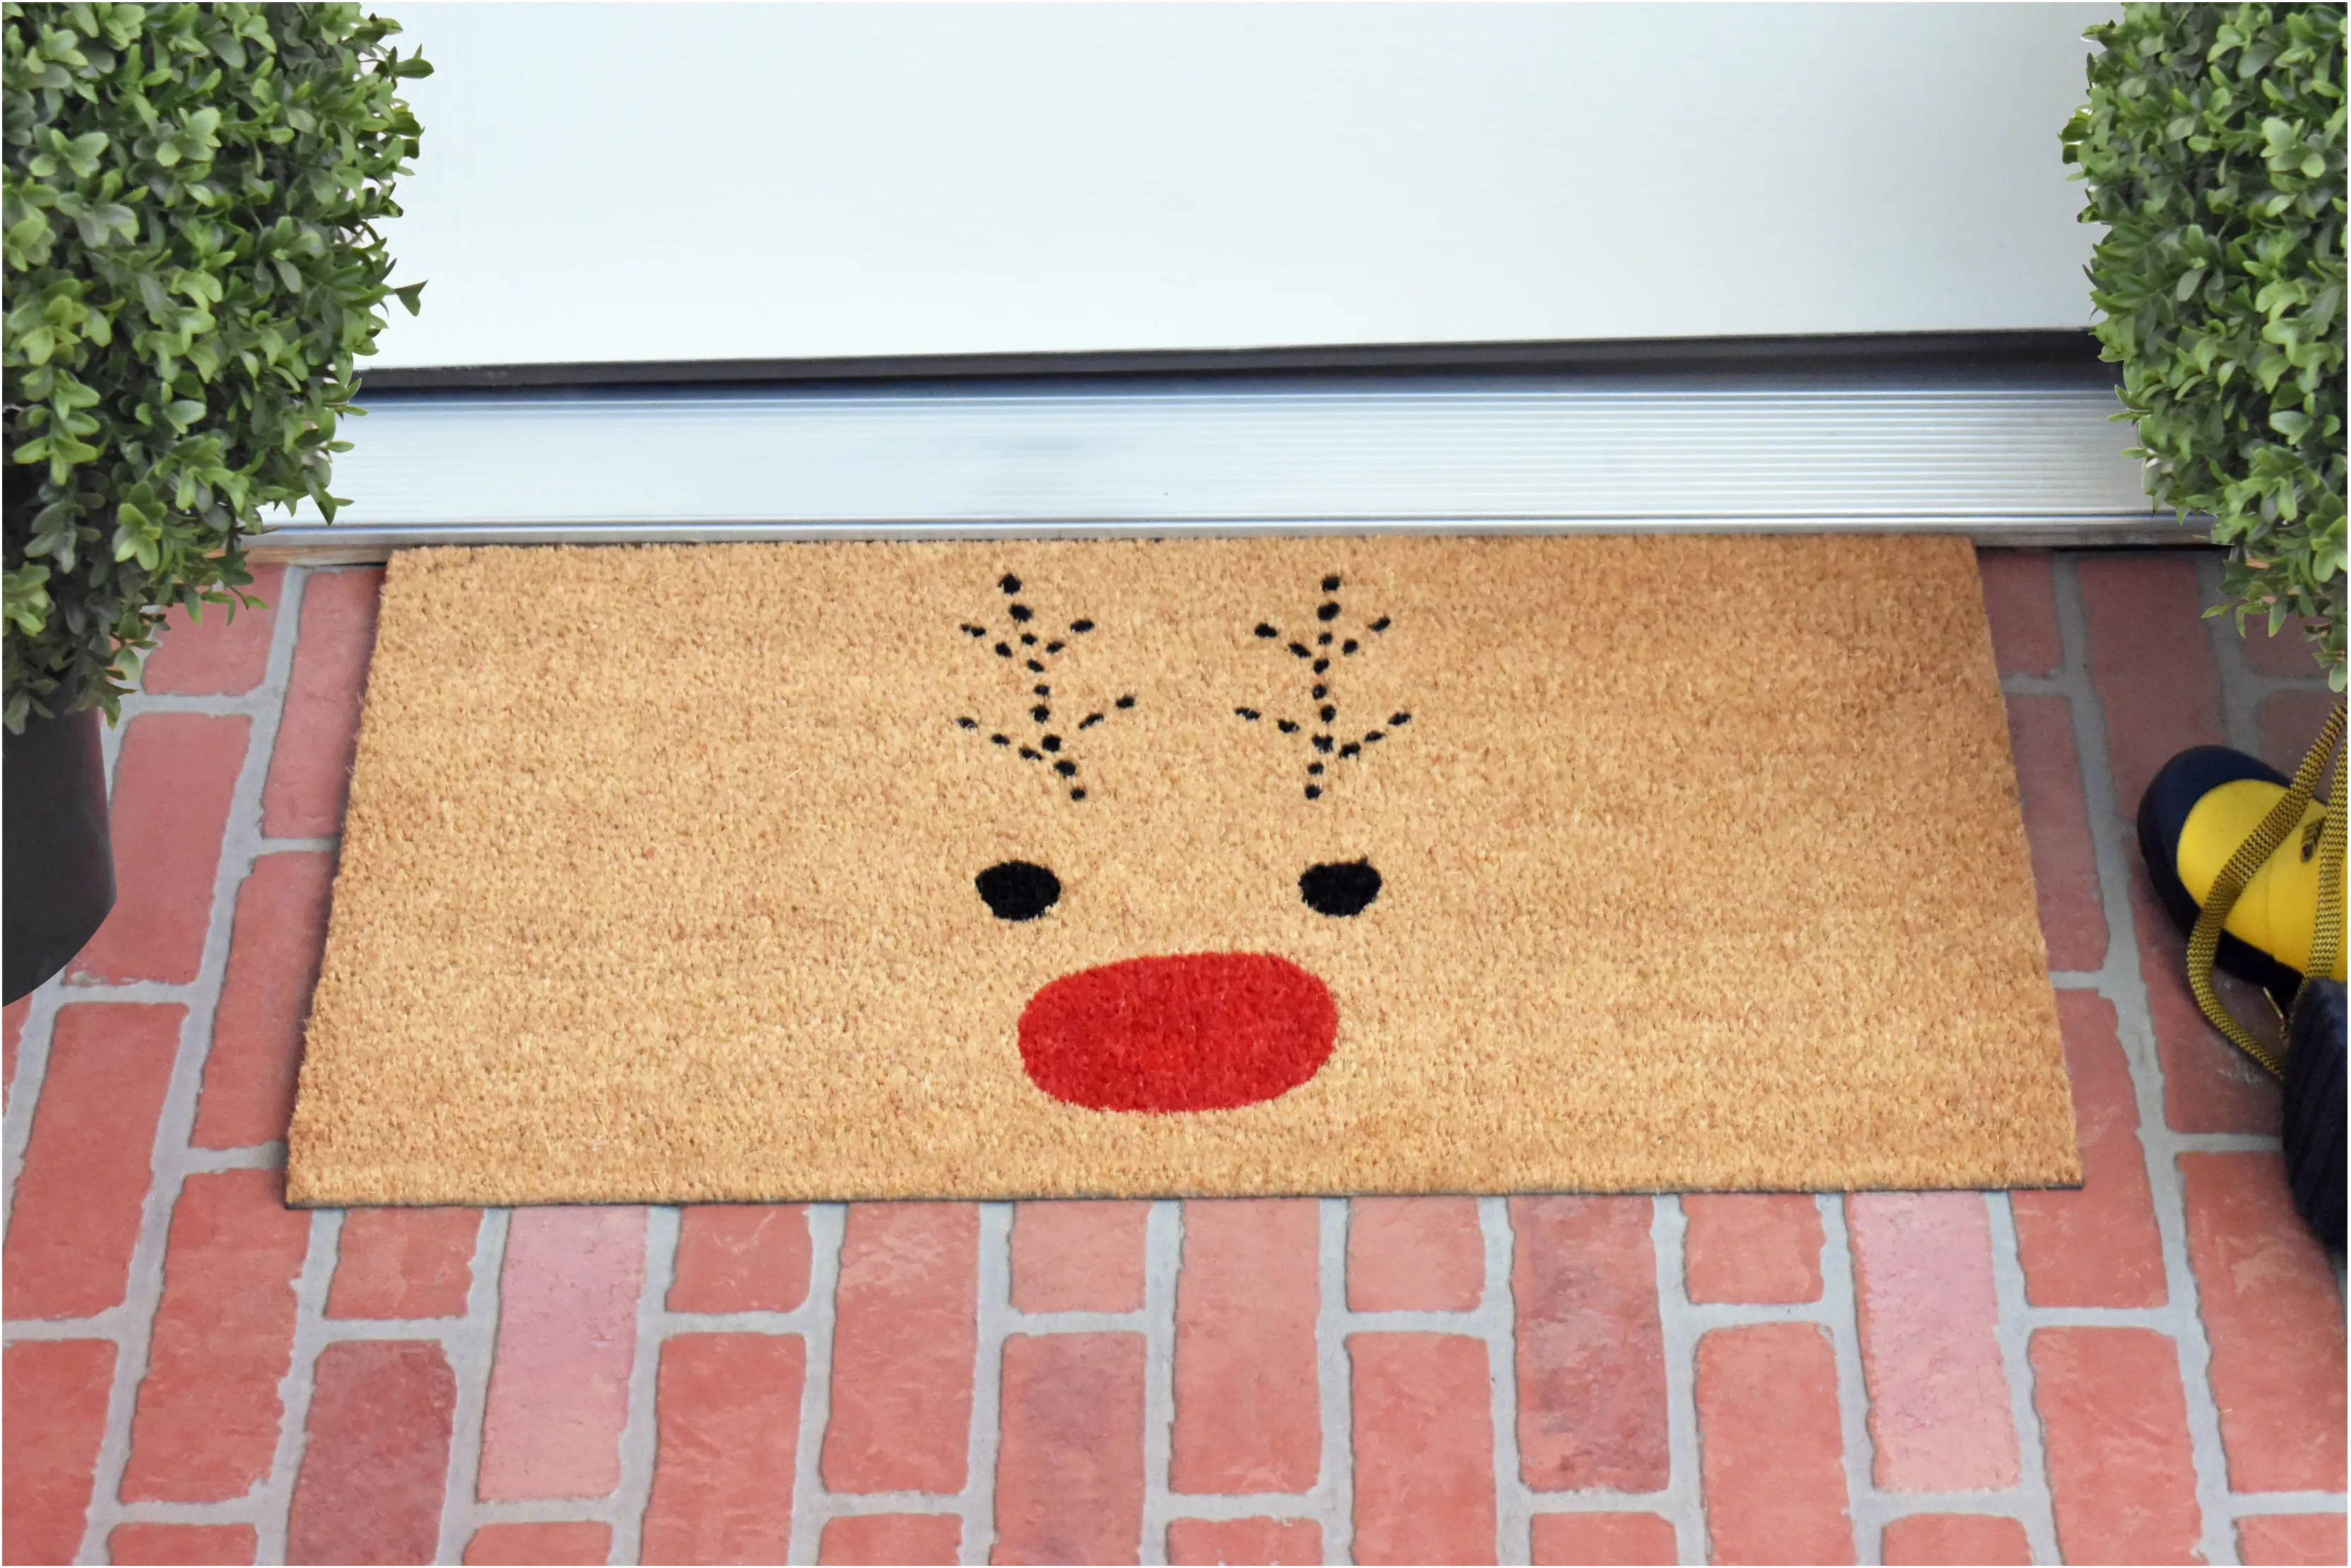 https://static.rcwilley.com/products/112423220/Rudolph-Doormat-rcwilley-image1.webp